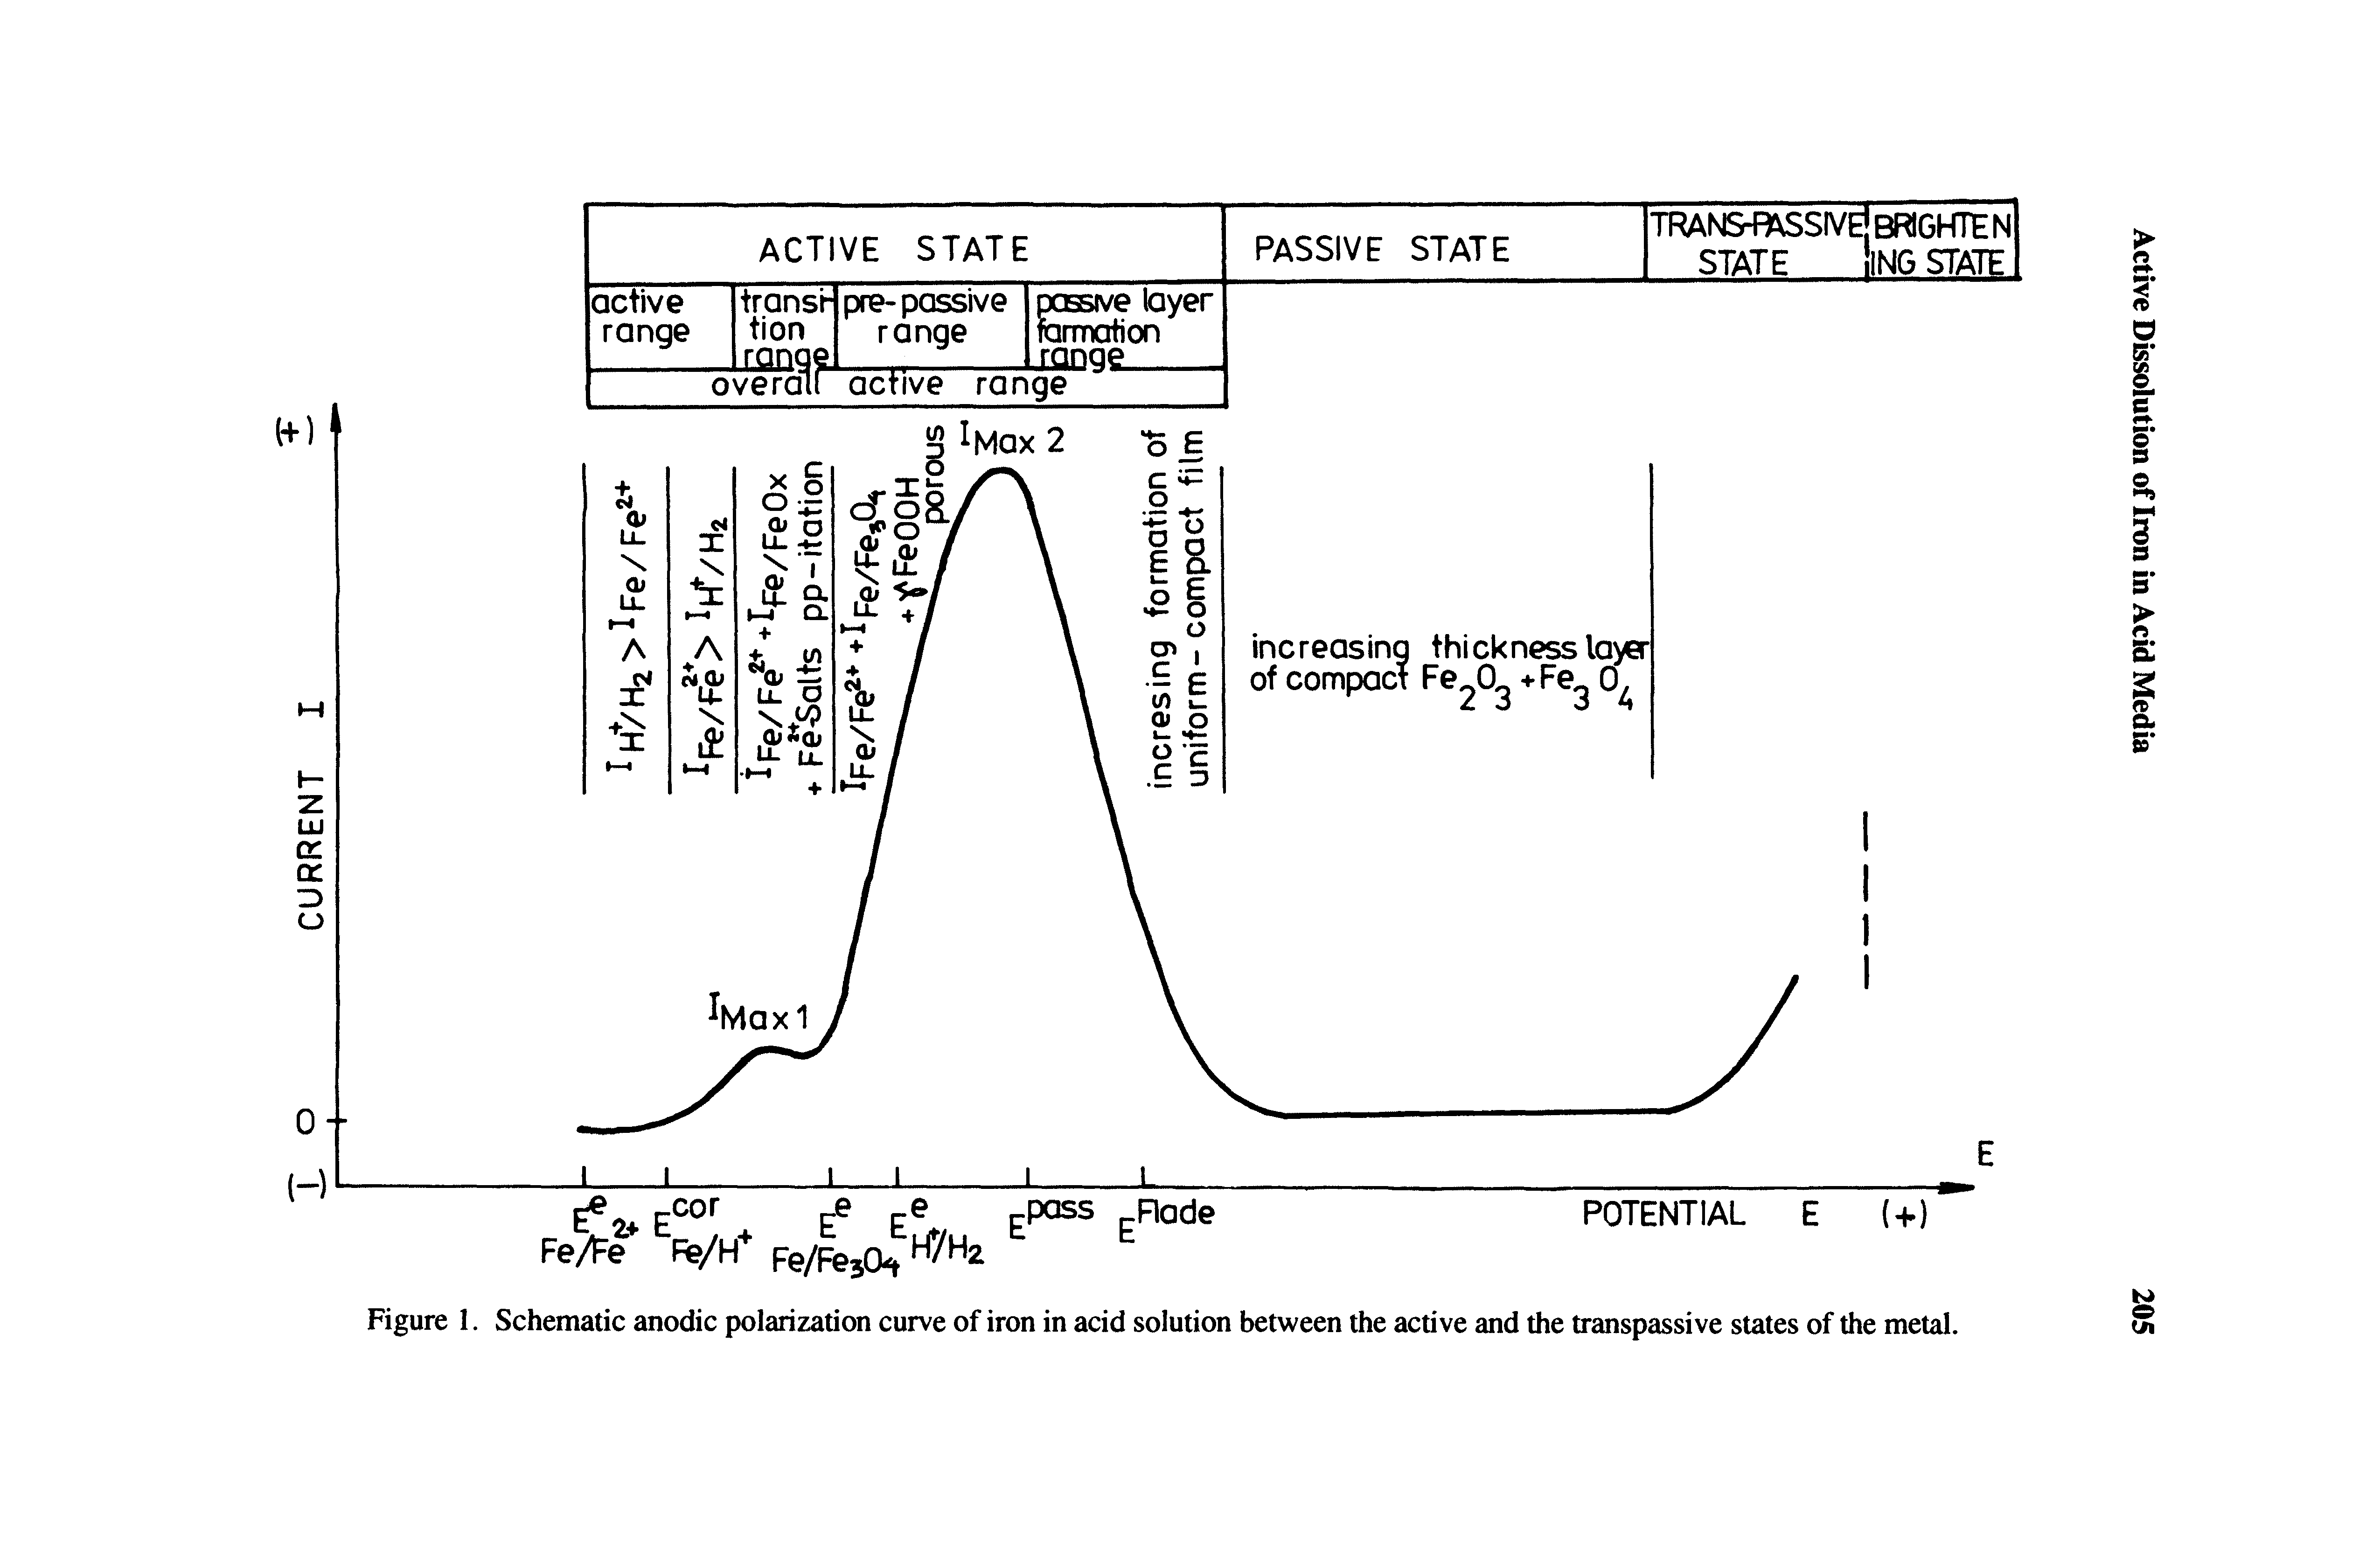 Figure 1. Schematic anodic polarization curve of iron in acid solution between the active and the transpassive states of the metal.